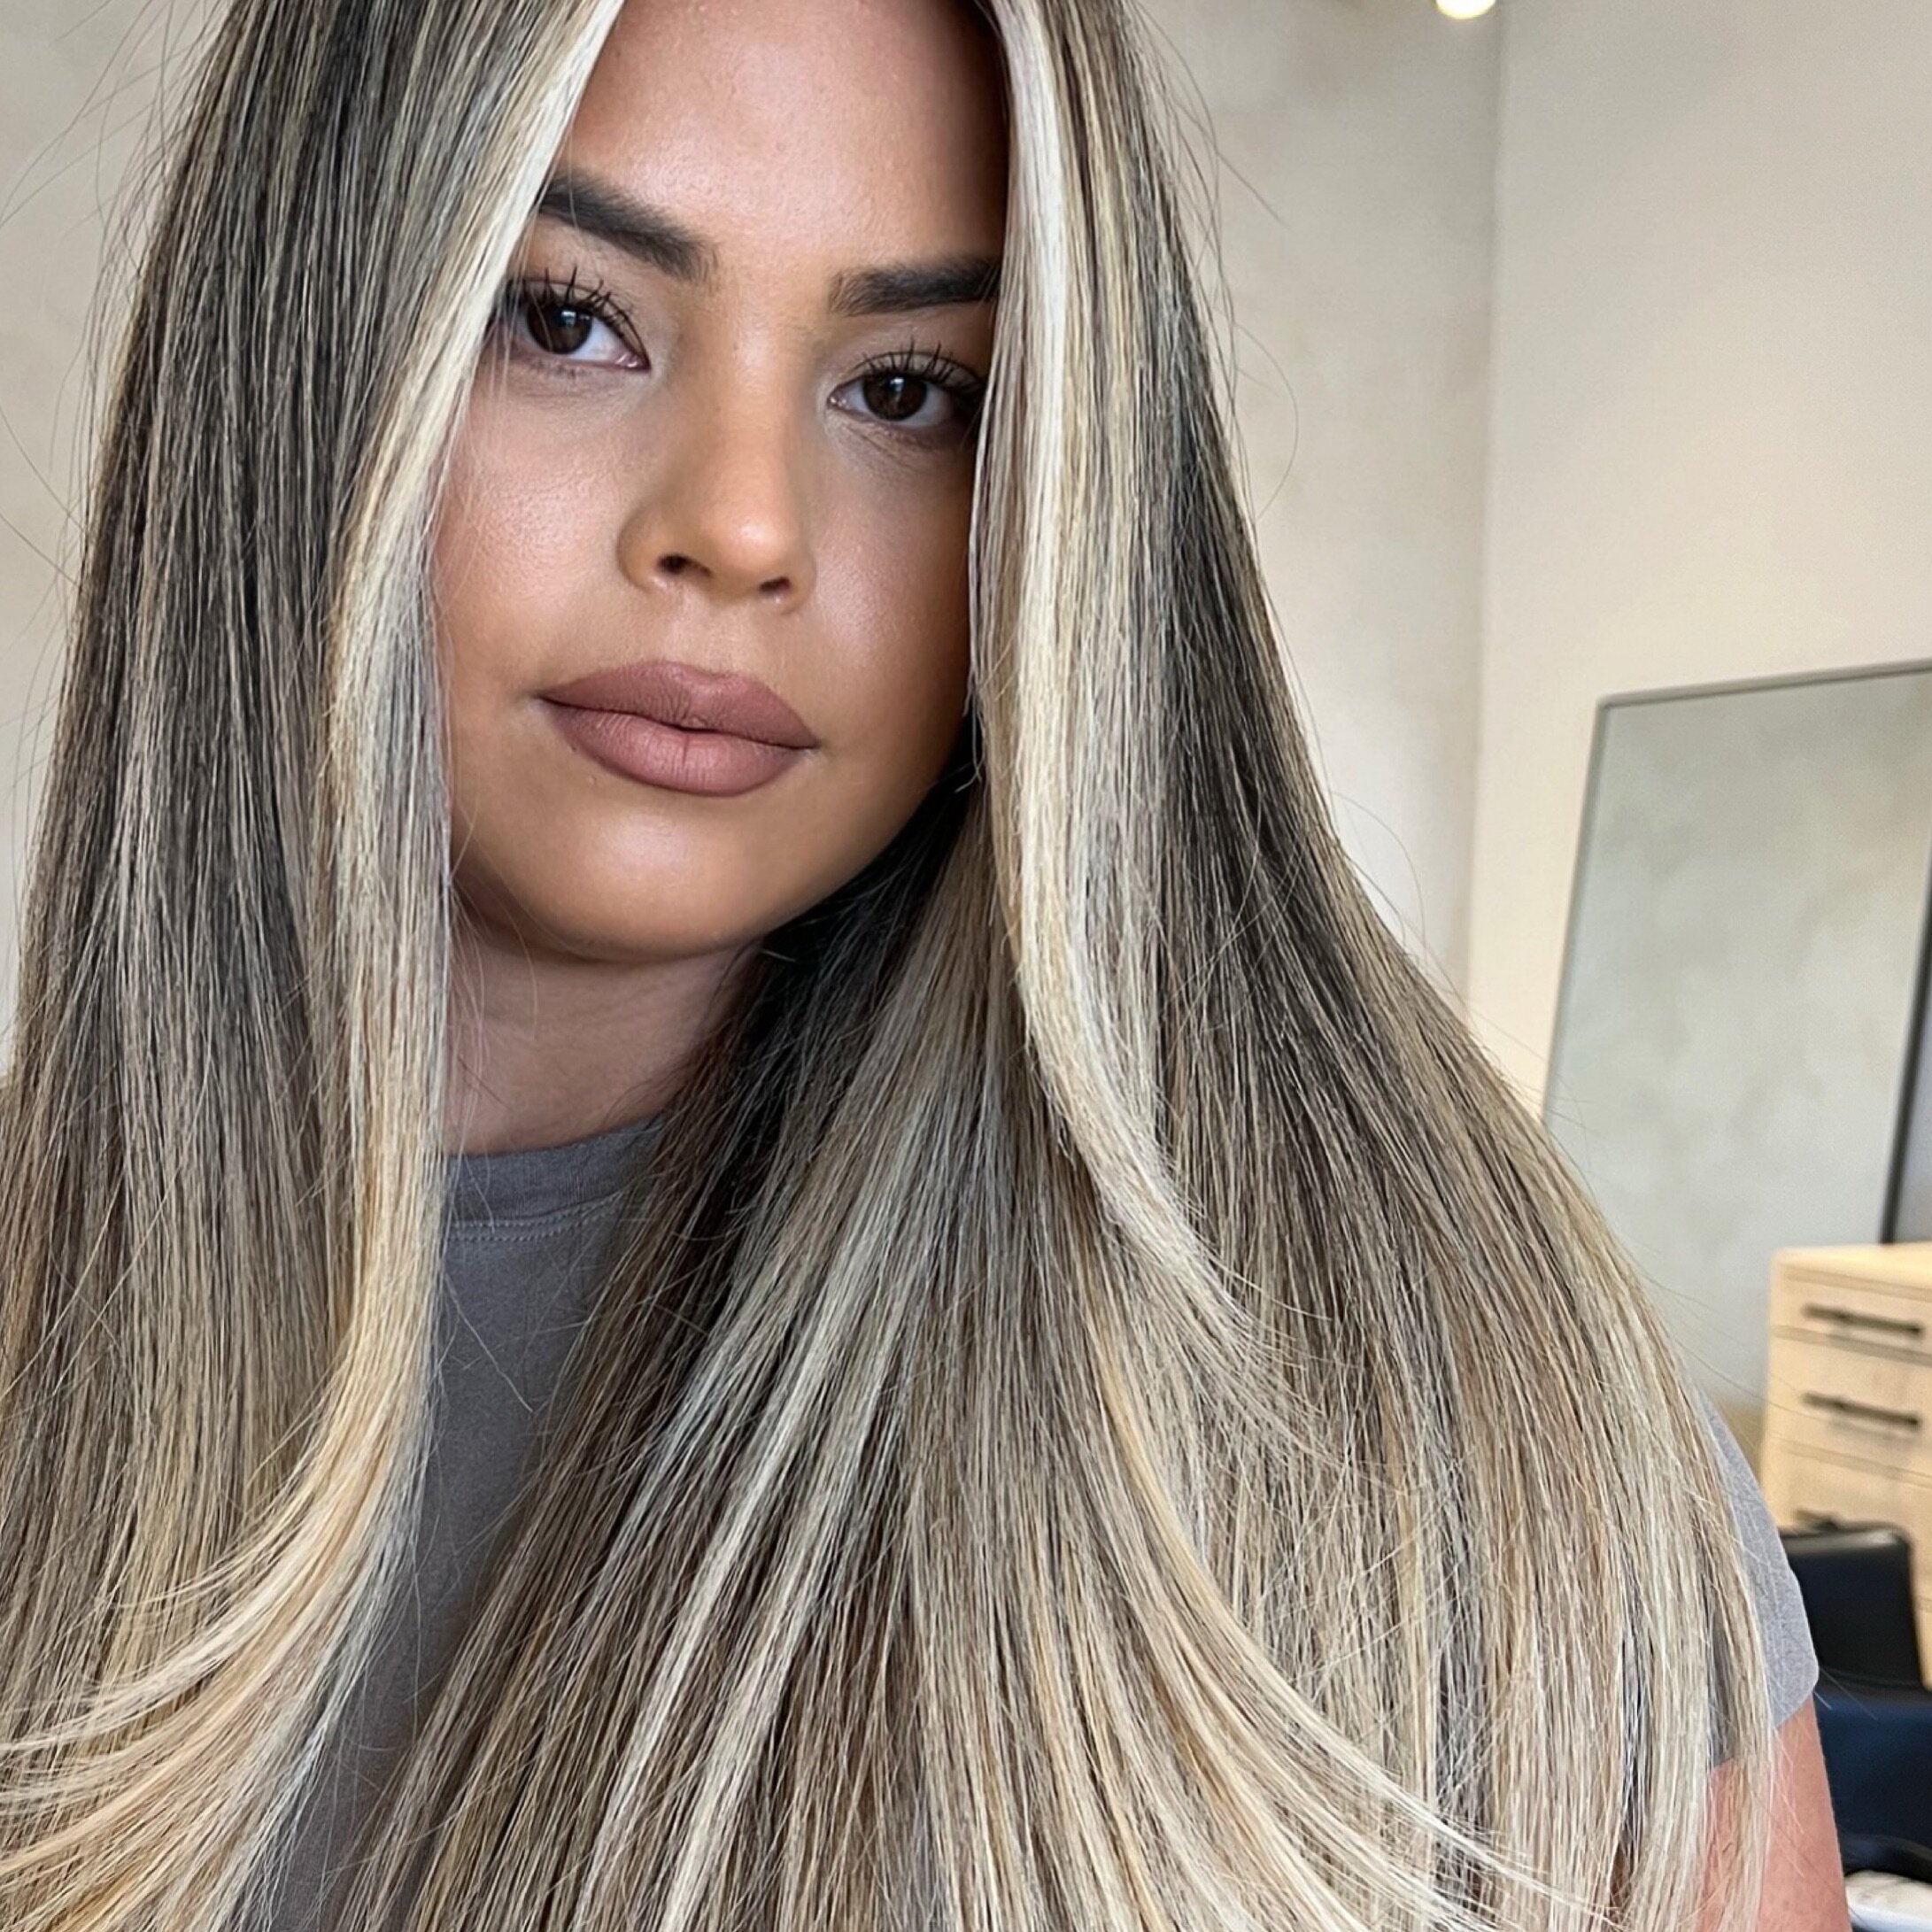 Calling all the girlies who want to be blonde for summer 🗣️⭐️✨
This is your sign!!
.
.
.
.
.
#richbrunette #hairtrends #hairtrends2023 #milbon #Businessowner #redlandsbusinessowner #livedinbalayage #redlandshair #IEhairdresser #LAhairstylist #redlan